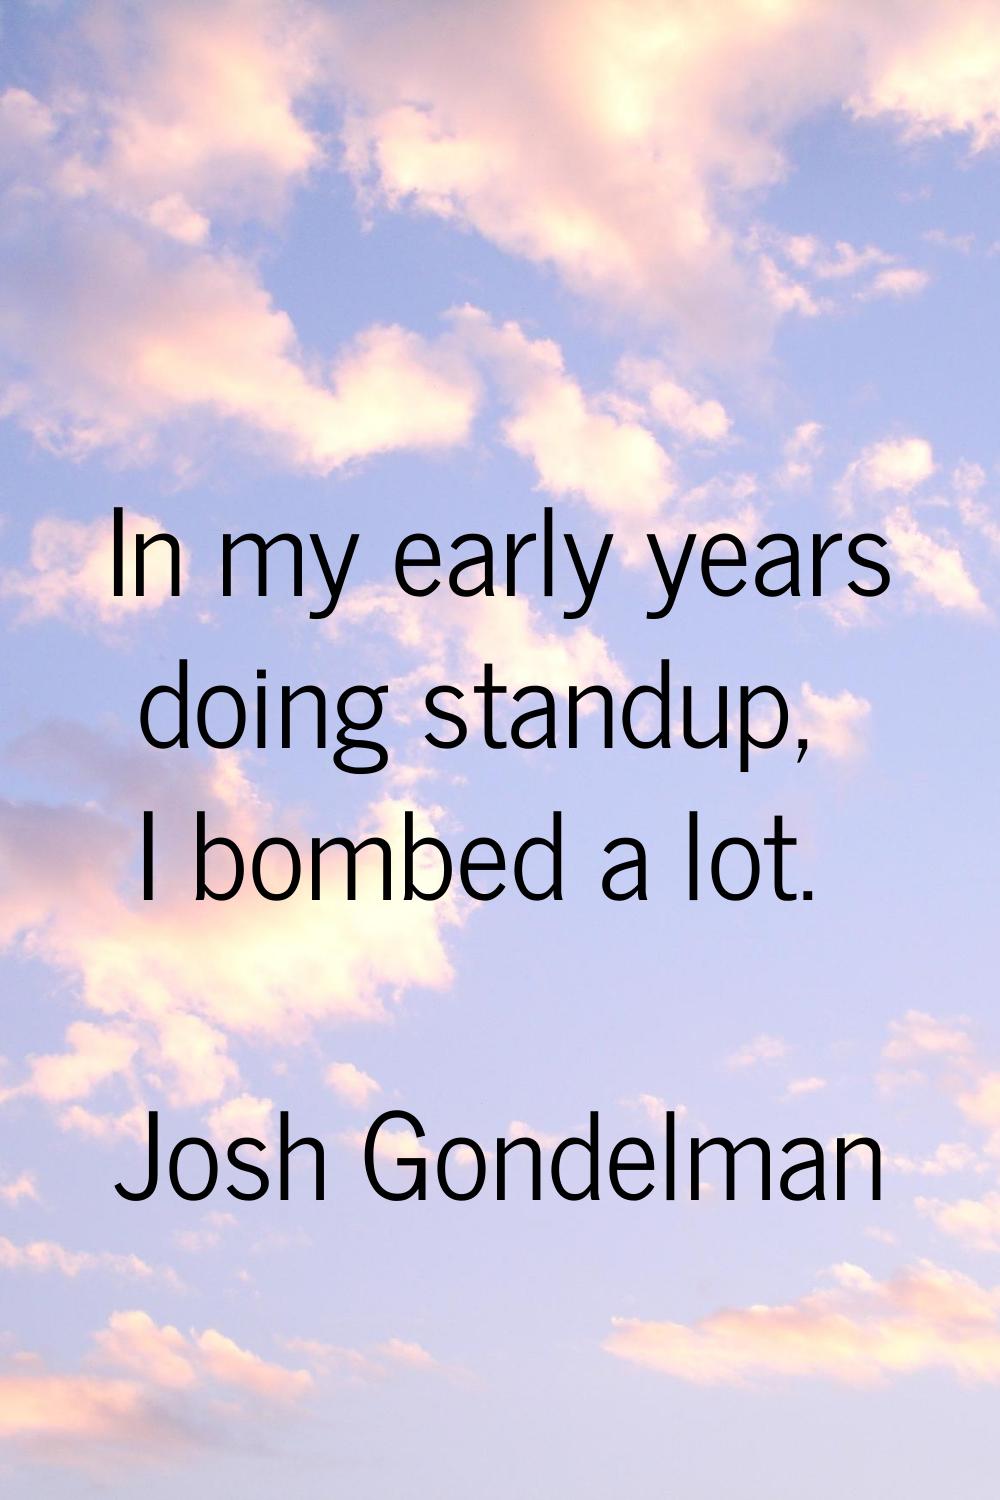 In my early years doing standup, I bombed a lot.